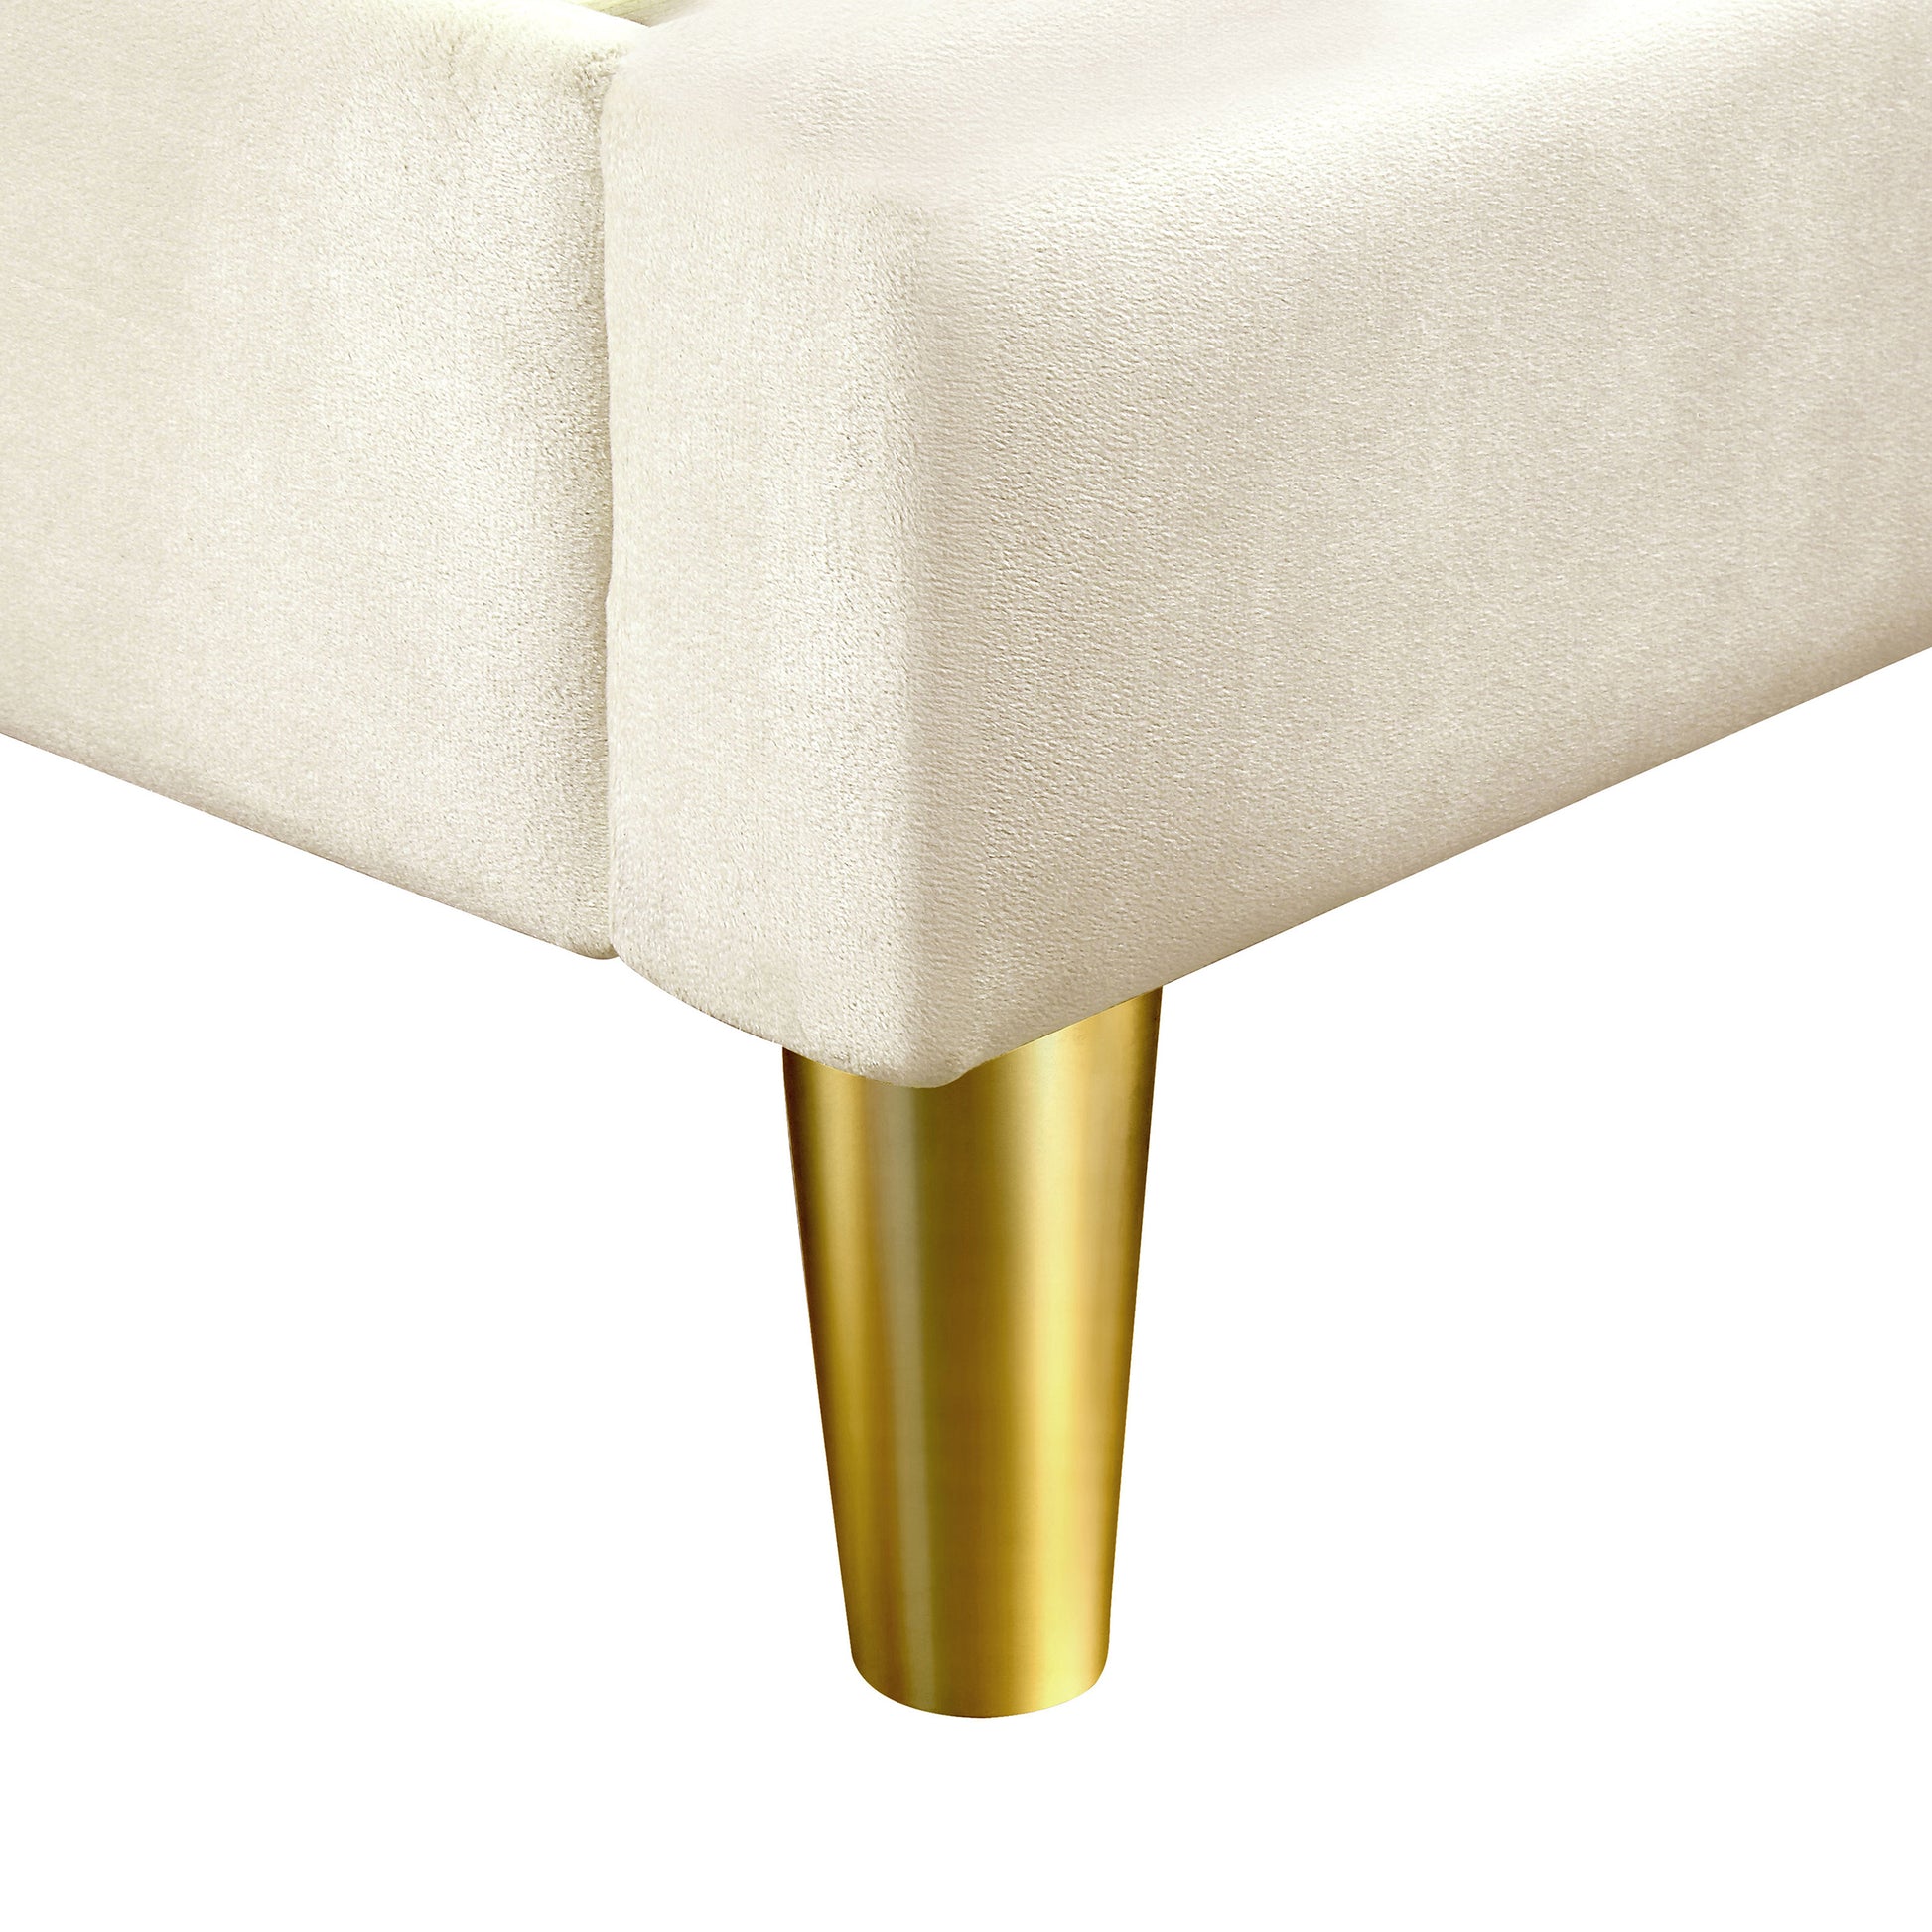 Right angled leg close-up view of a contemporary beige and gold upholstered queen bed on a white background